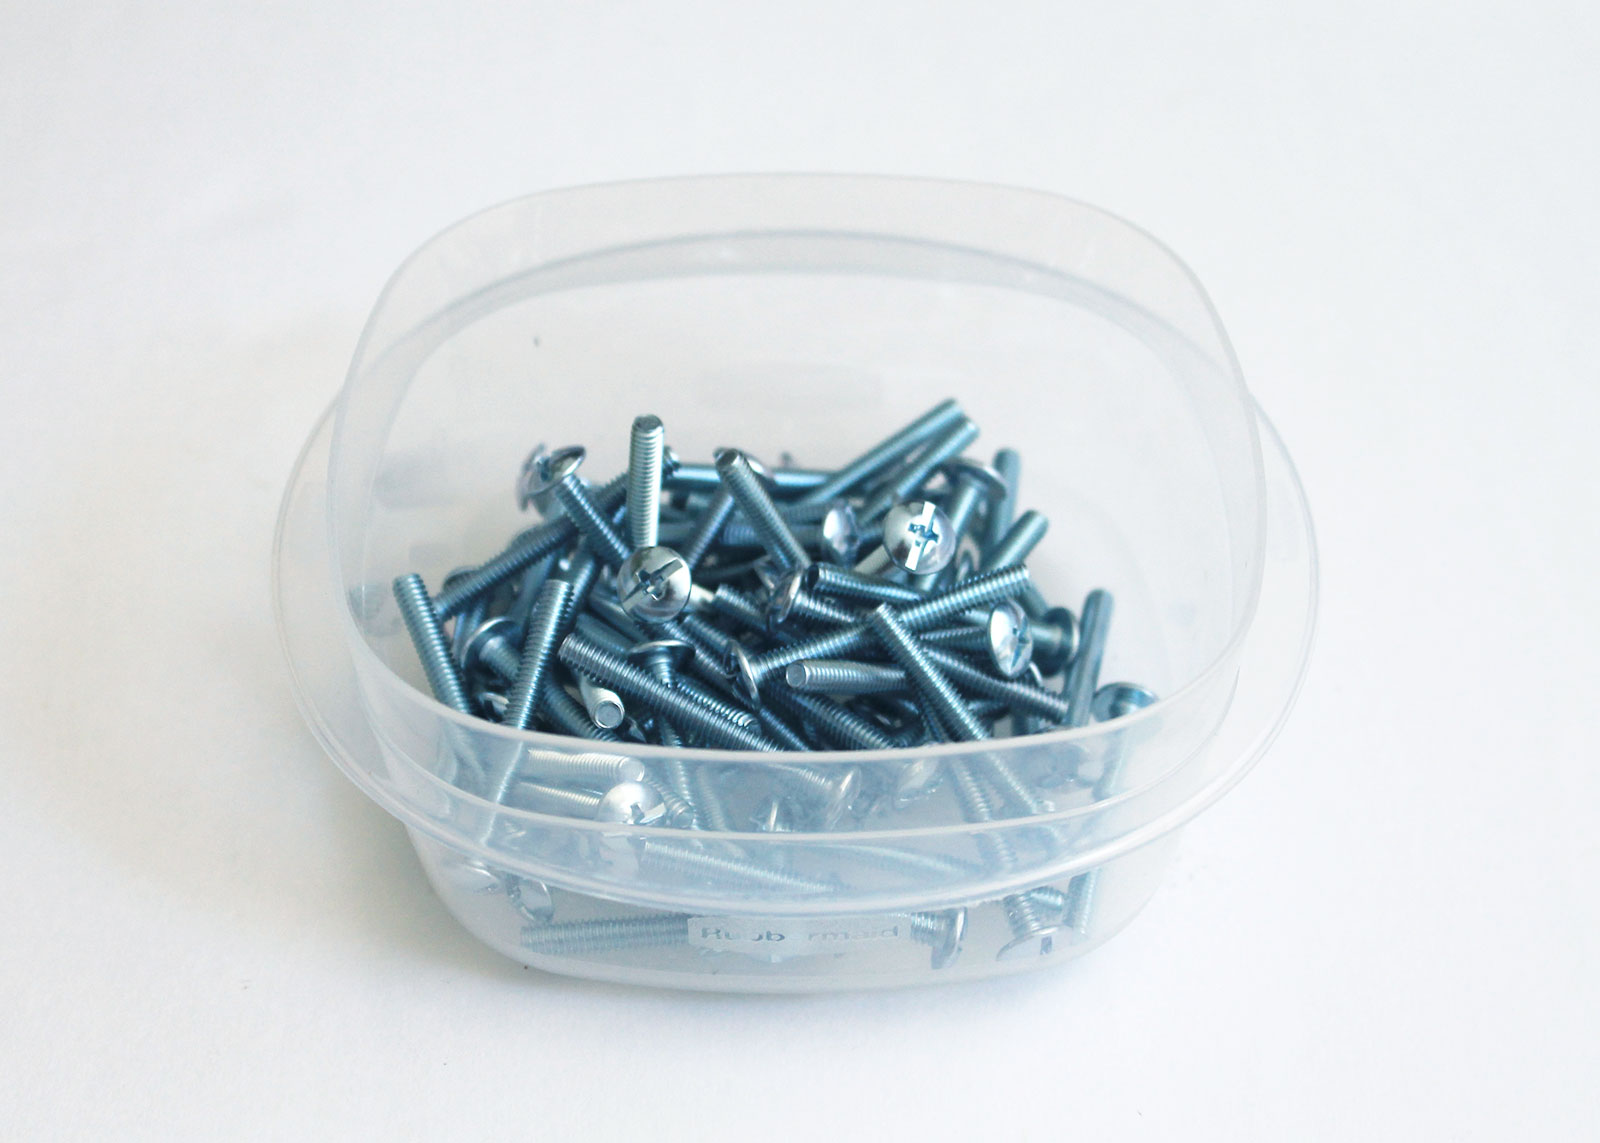 Repurpose plastic containers to store small tools